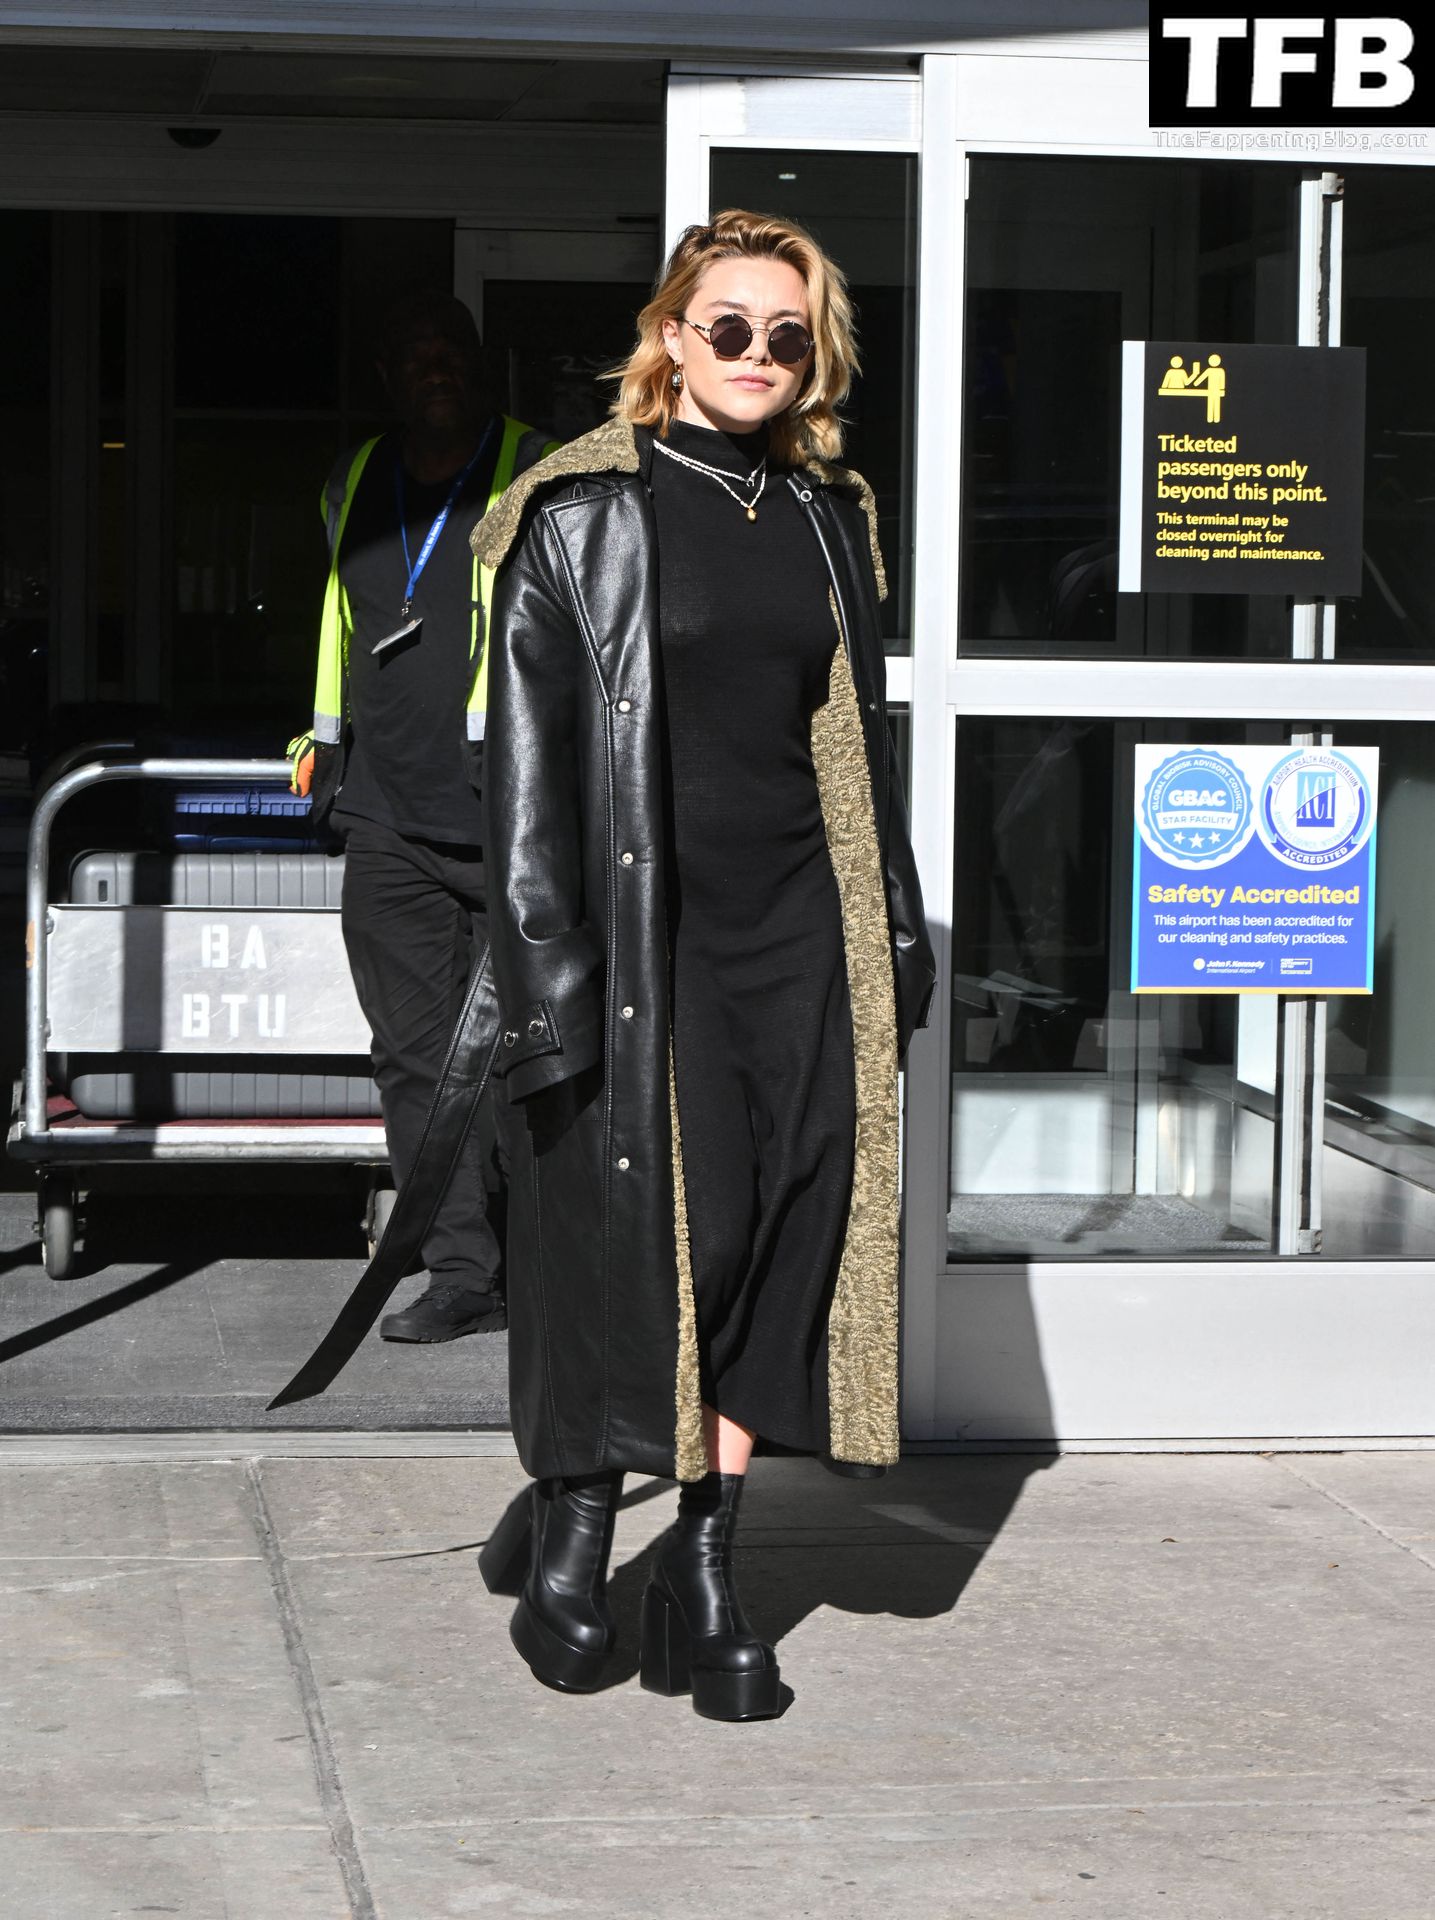 Florence Pugh Pokies The Fappening Blog 10 - Florence Pugh Shows Off Her Pokies at JFK airport in NYC (31 Photos)